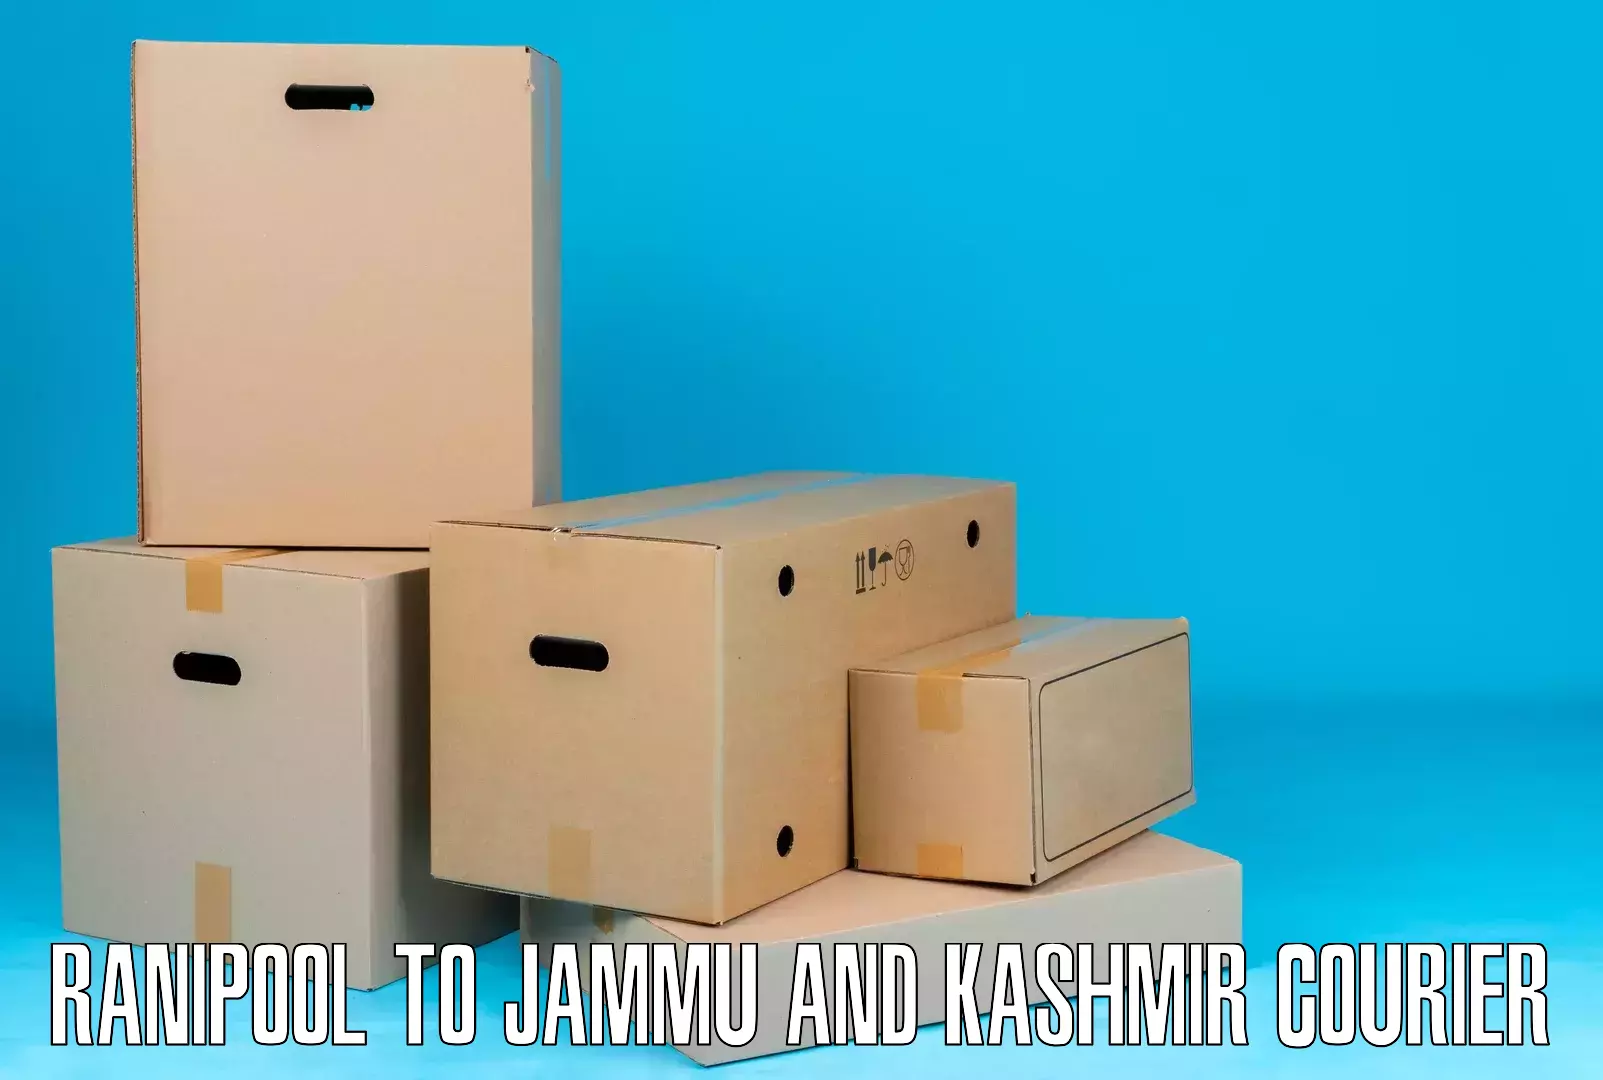 Commercial shipping rates Ranipool to Kathua